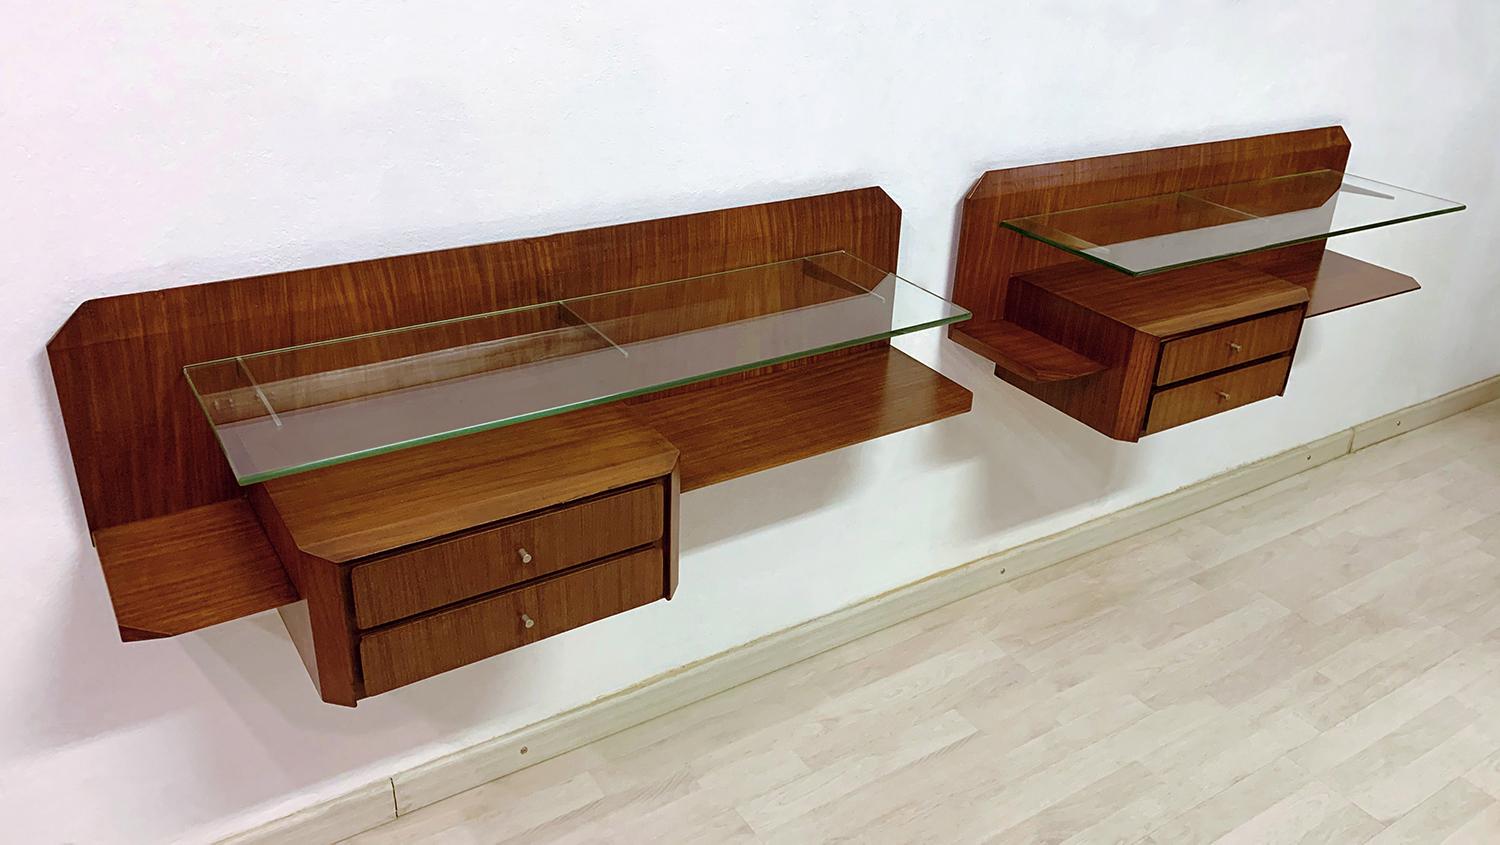 Stunning pair of Italian floating wall teakwood console, with drawers and glass shelves, attributed to Gianni Moscatelli in the 1960s.
Both item are in good conditions of the period as the images show, with slight signs of wear consistent with age